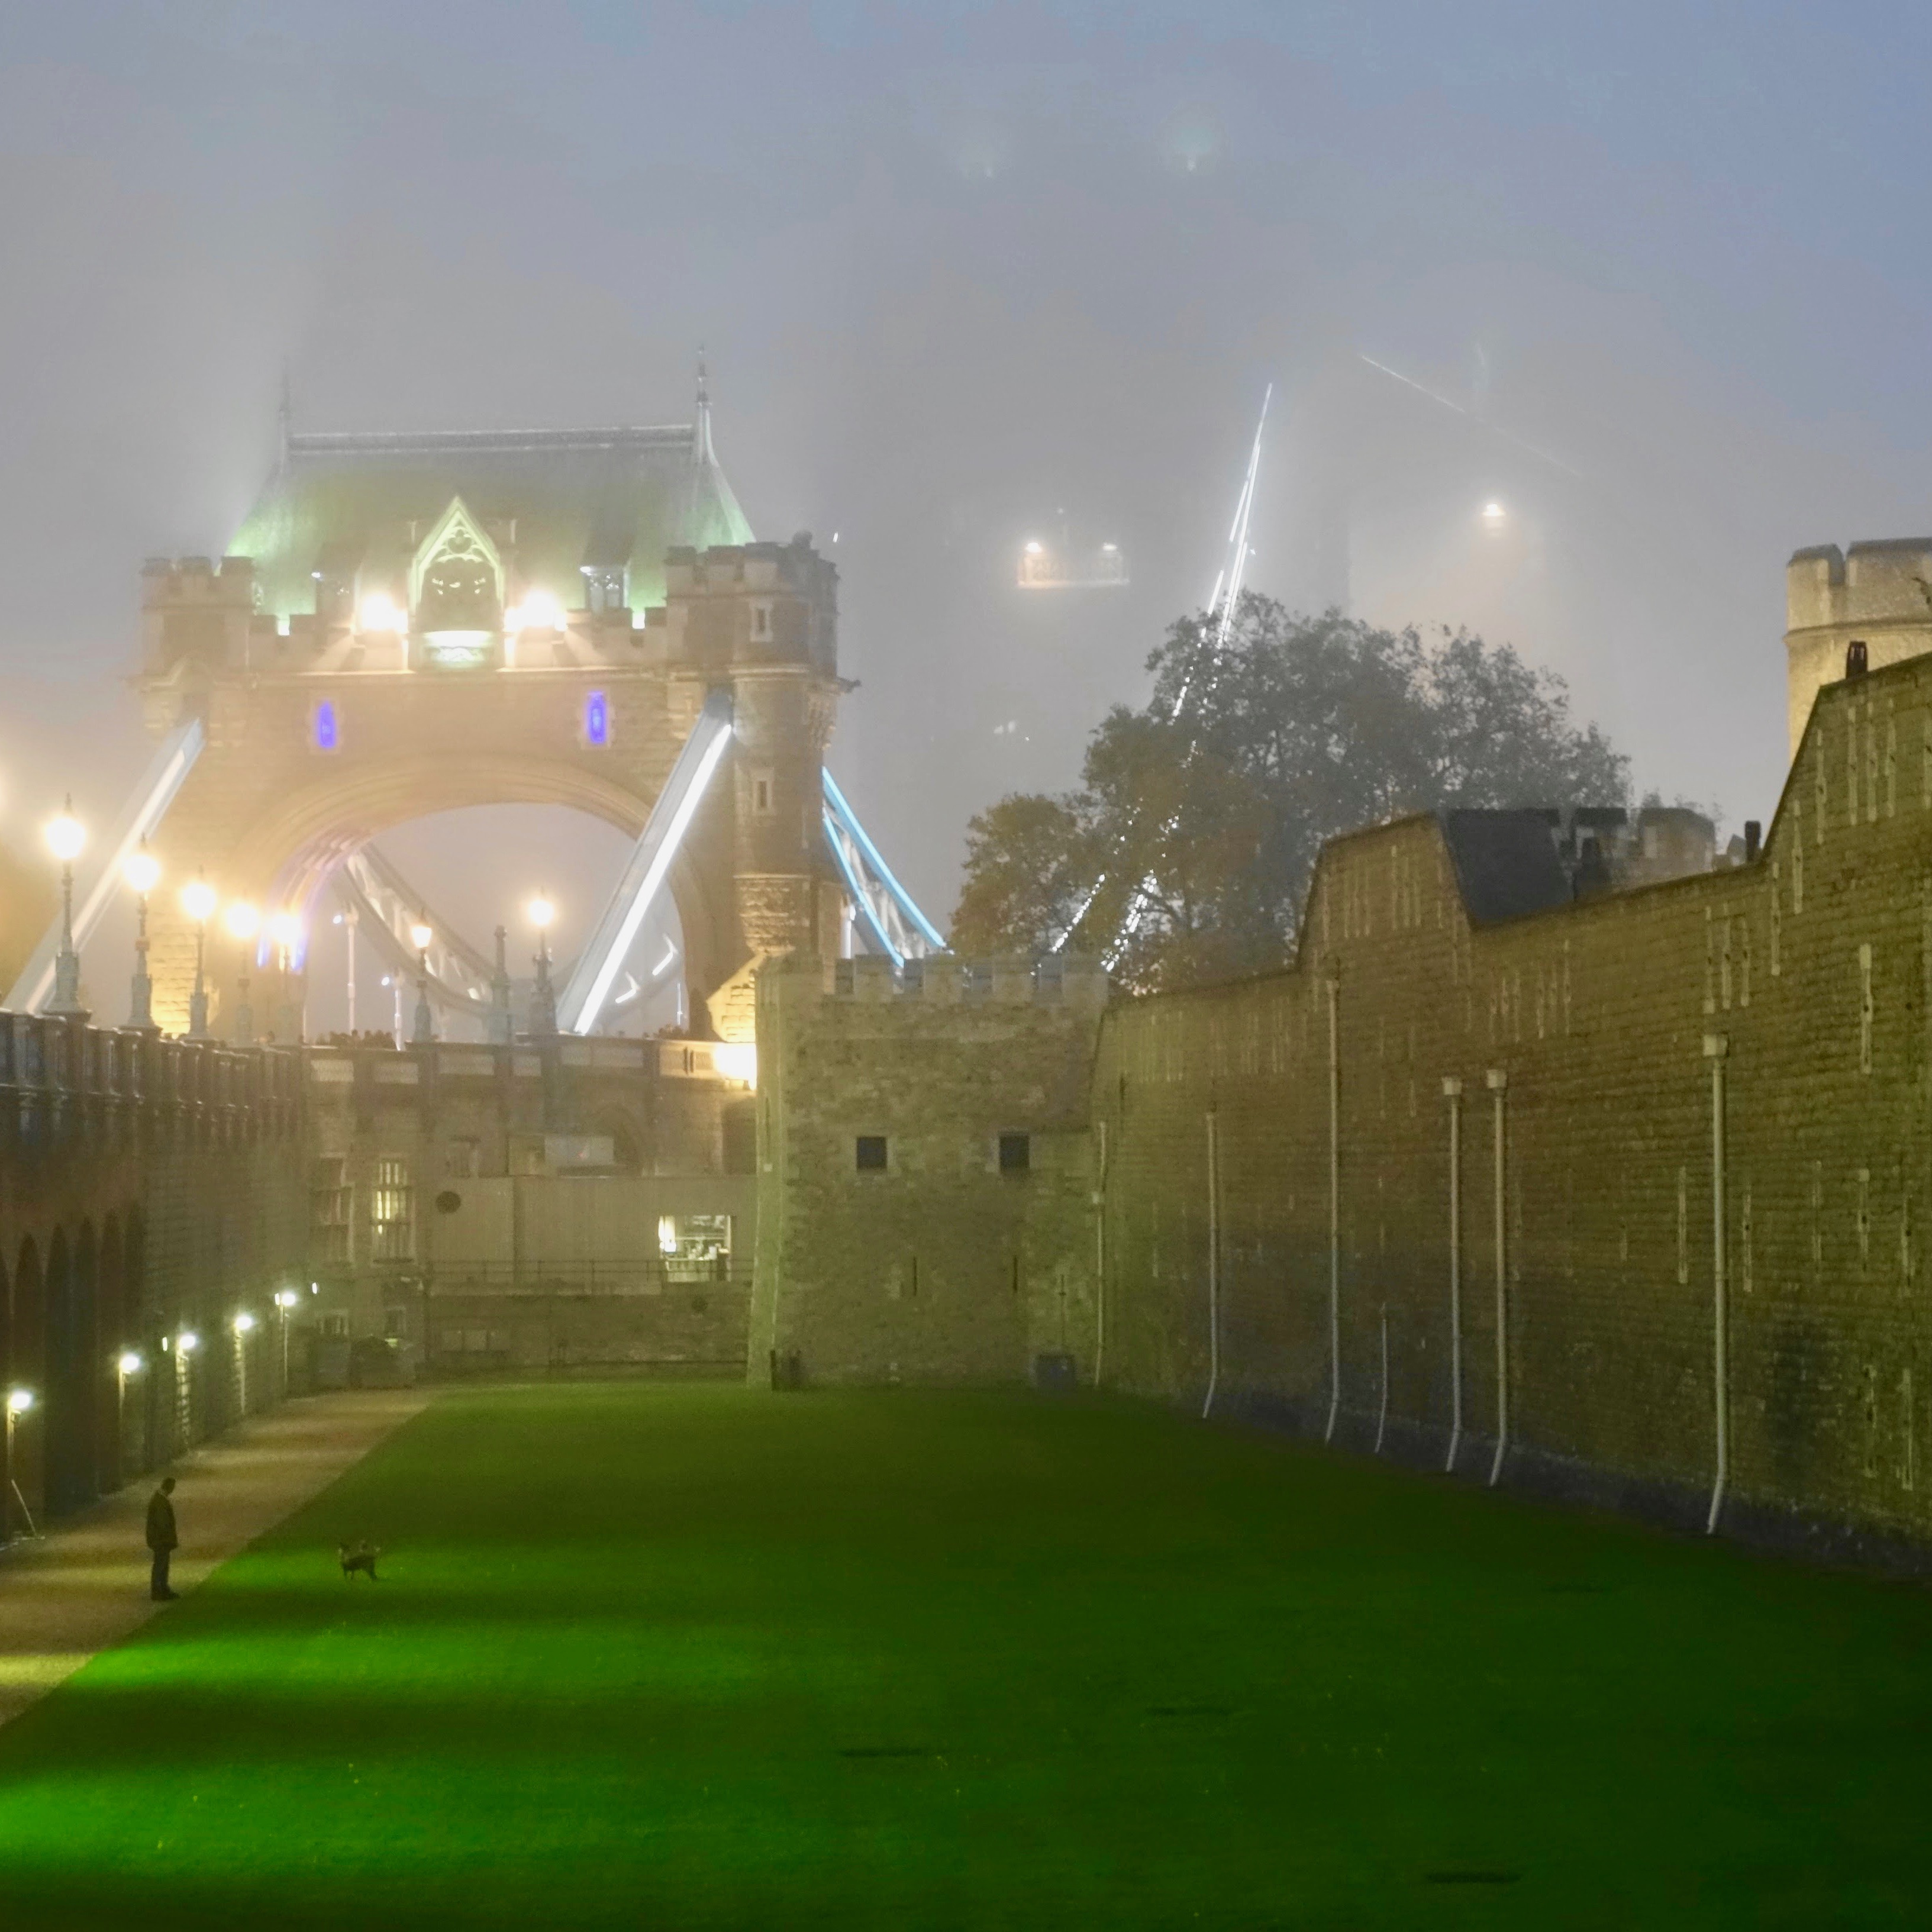 The Tower Bridge in London on a mystic quintessential foggy evening.  The green turrets at the top of the bridge can barely be seen through the fog and to the right lies the famous Tower of London with gray brickwork leading down to a vibrant green grassy lawn.  